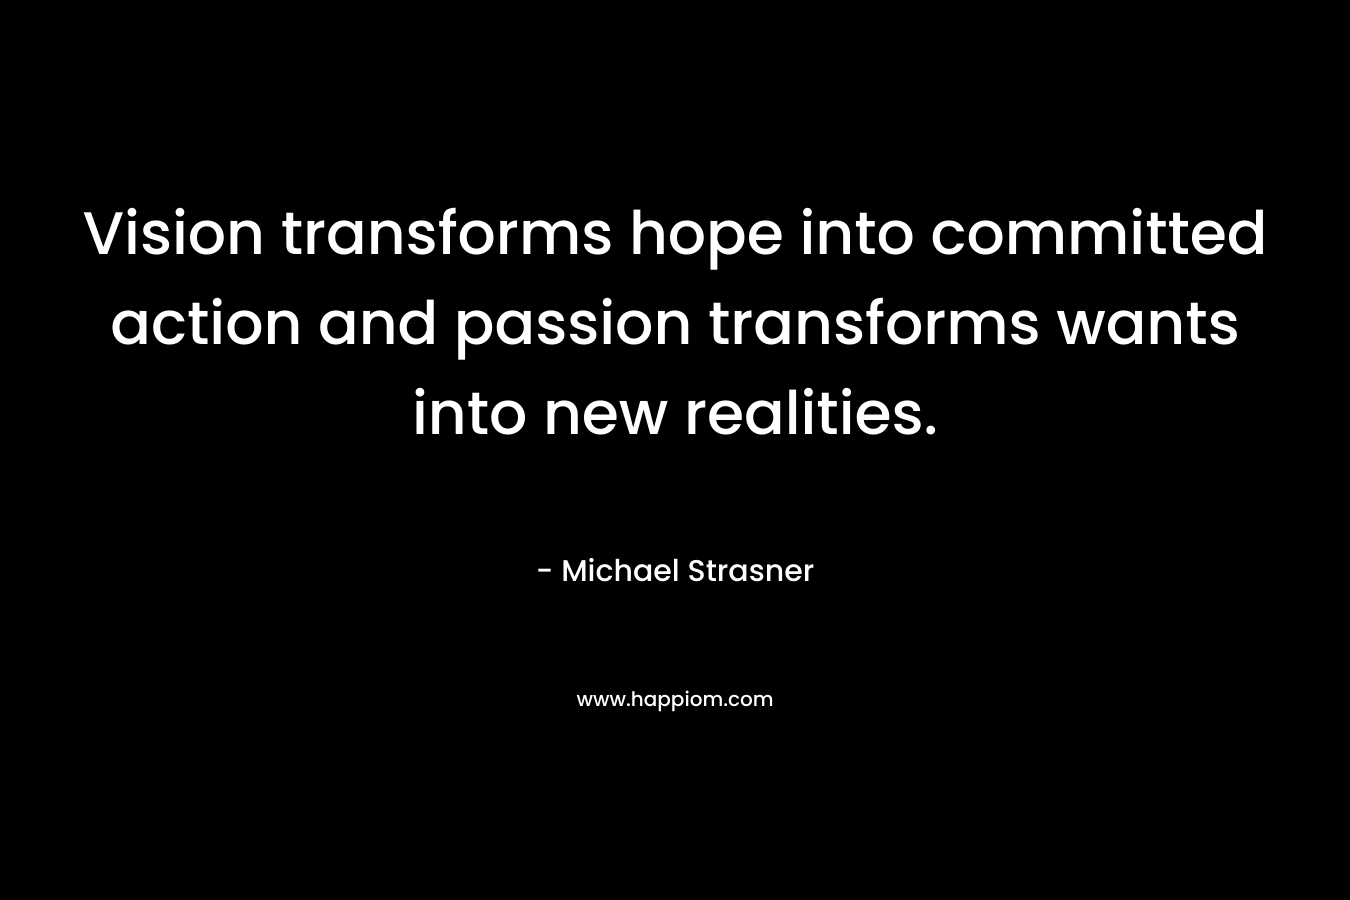 Vision transforms hope into committed action and passion transforms wants into new realities. – Michael Strasner